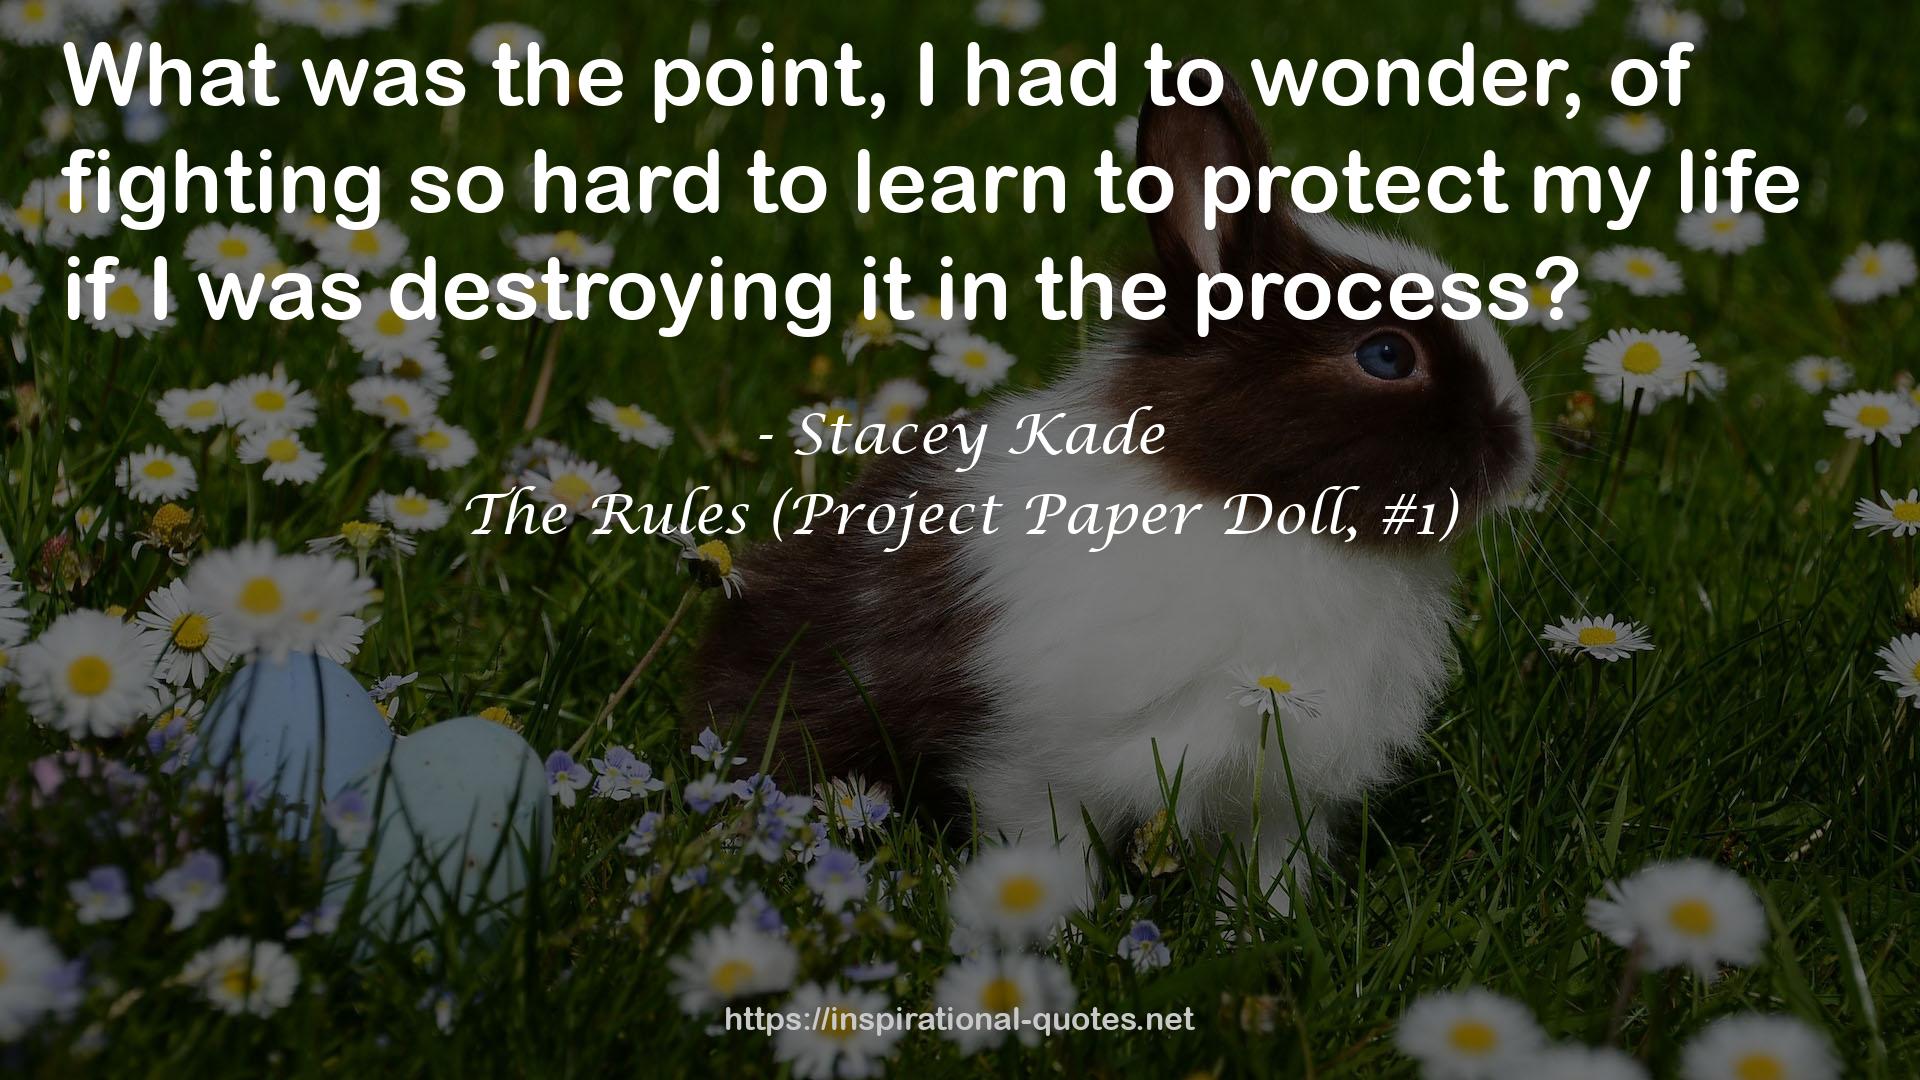 The Rules (Project Paper Doll, #1) QUOTES